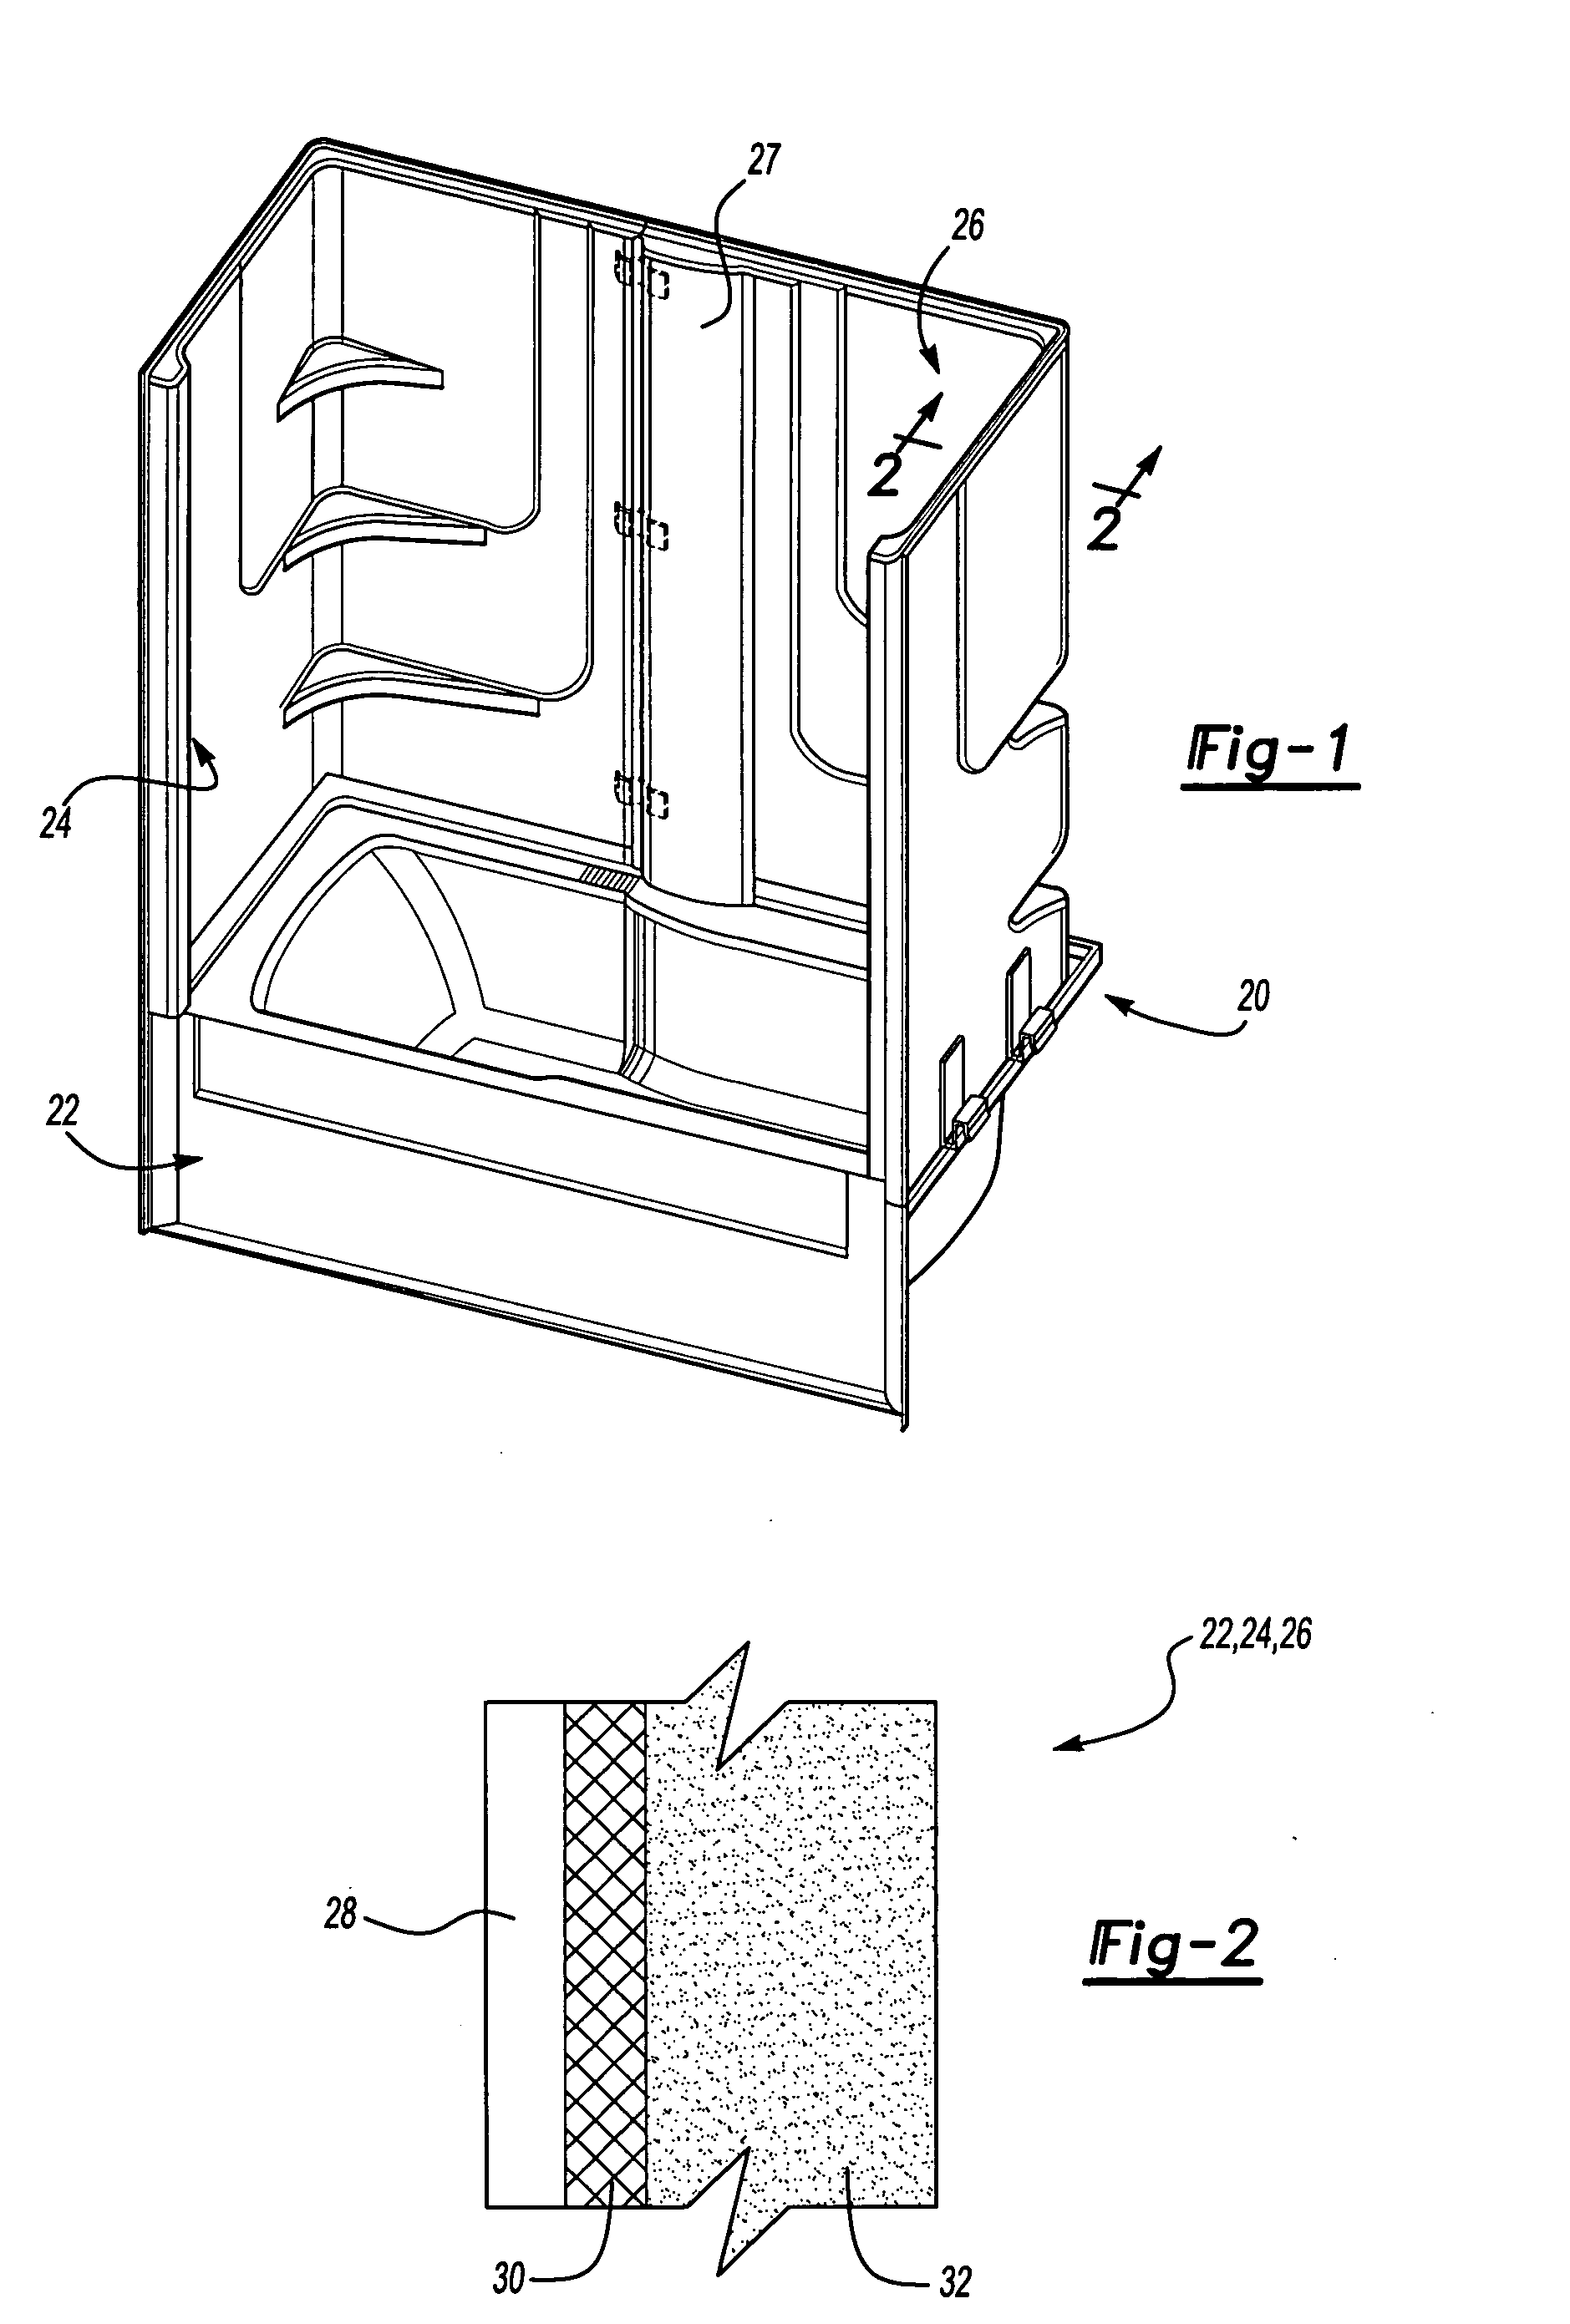 Polymer-based molded article with minimal flame spread and smoke properties